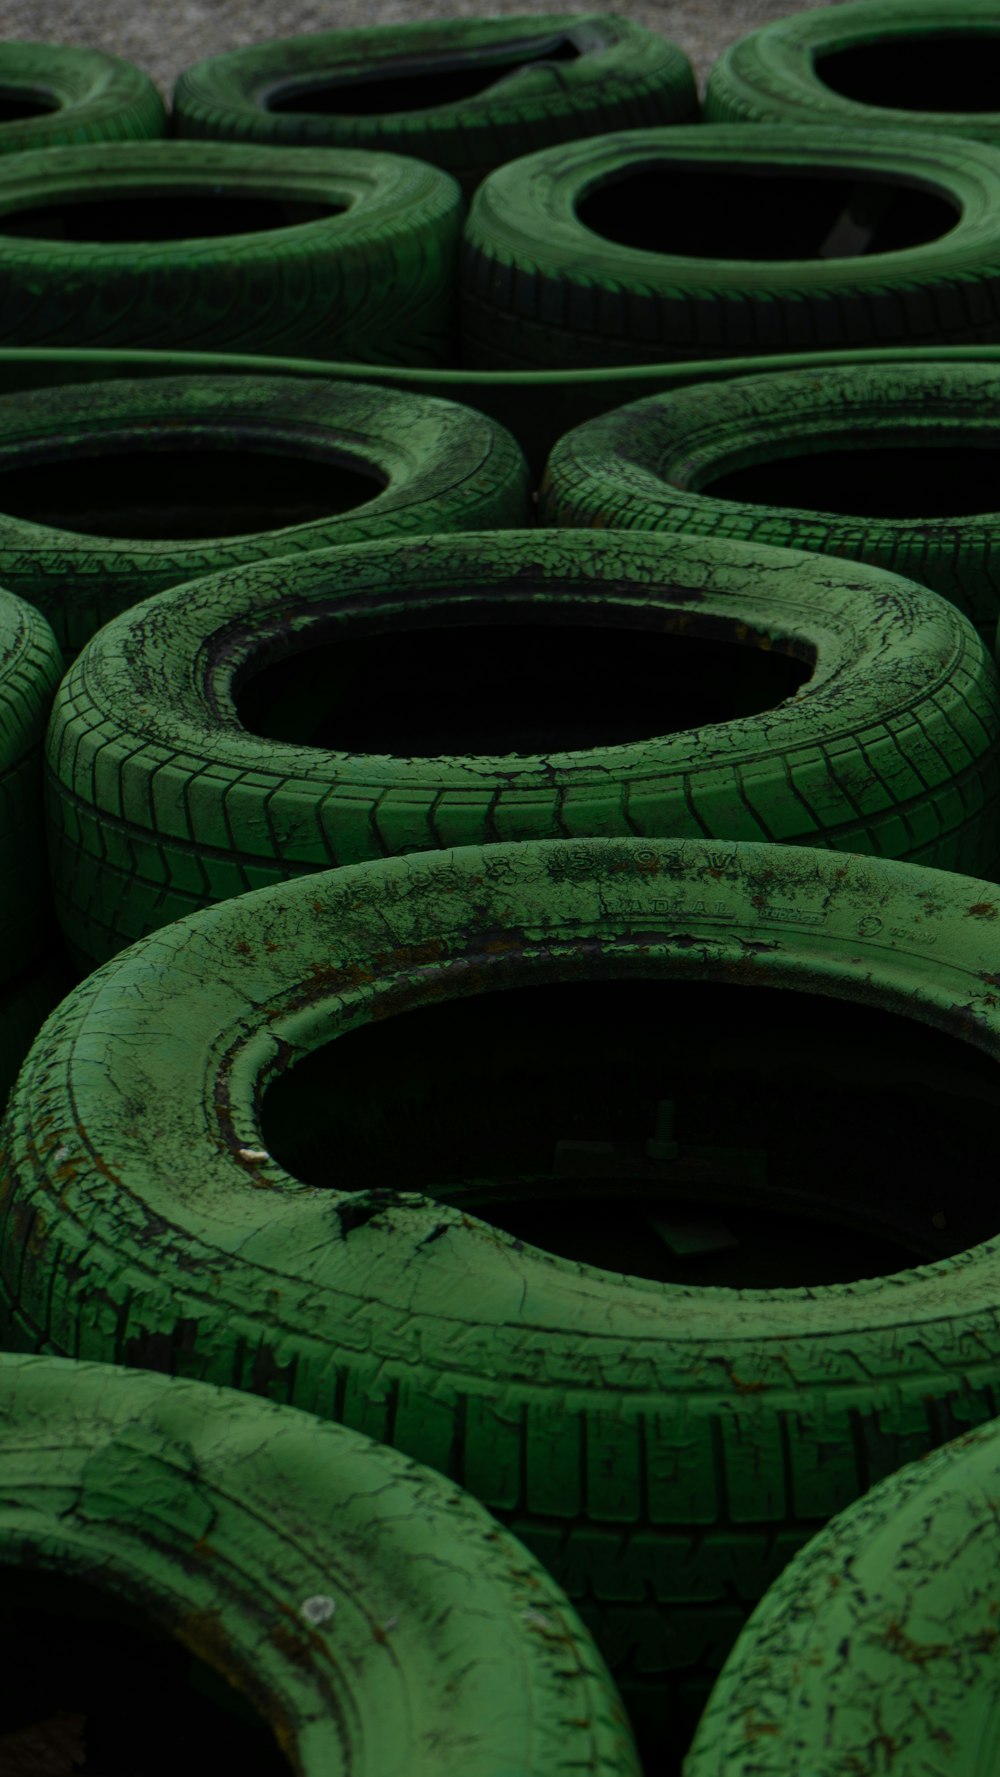 a pile of green tires sitting next to each other